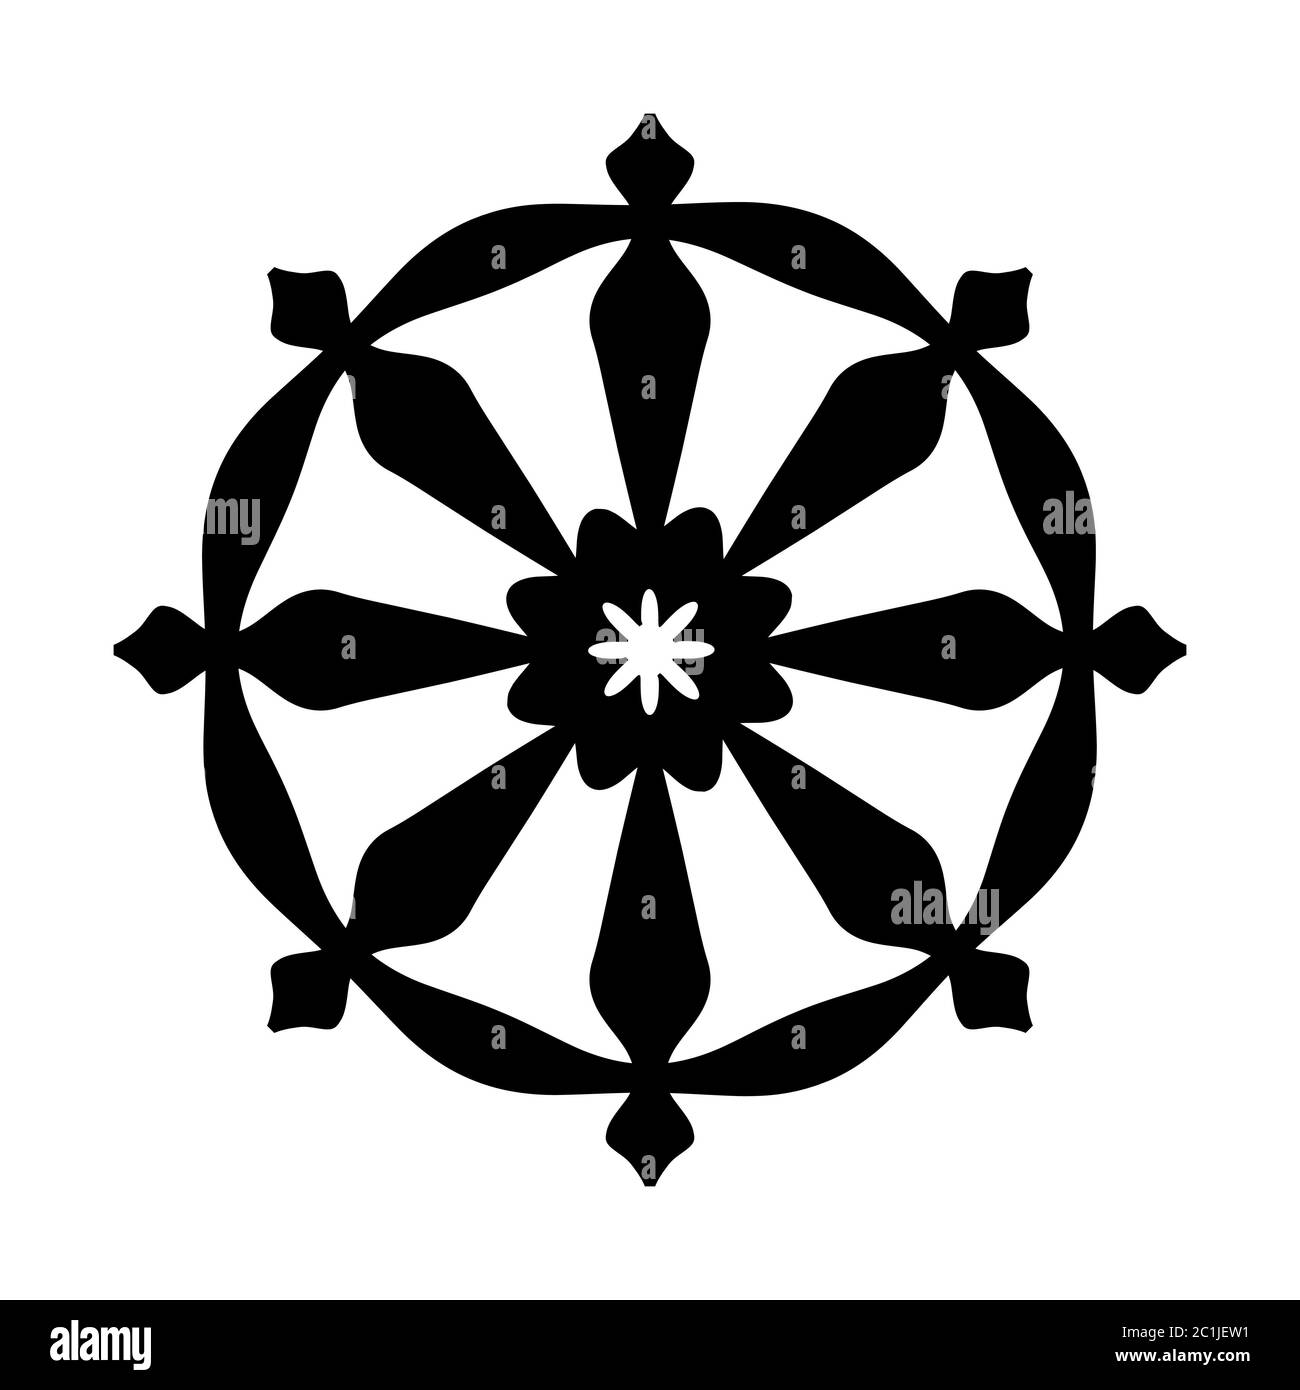 Wheel of Samsara — Symbol of Reincarnation, the cycle of death and rebirth (Sacral sign of all Indian religions). Stock Photo